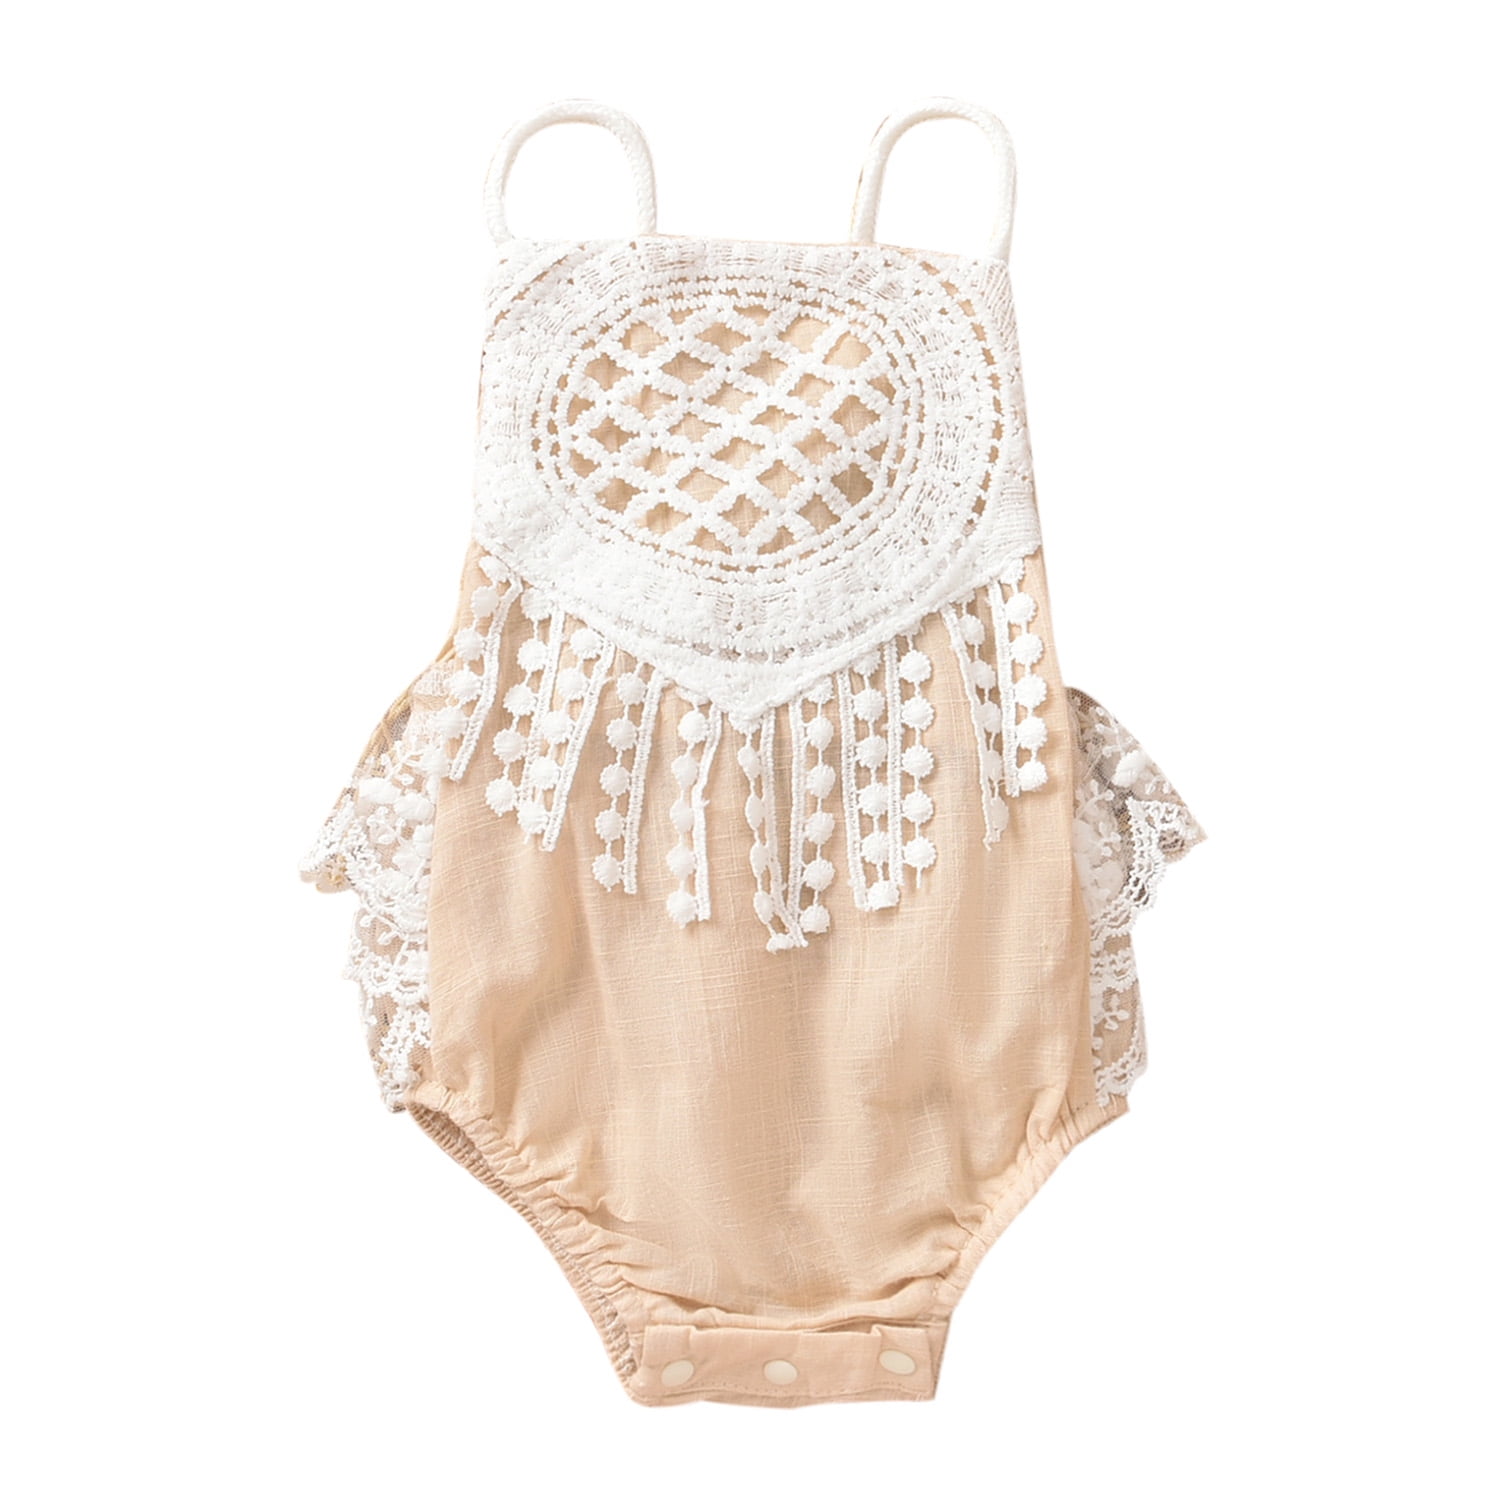 Newborn Baby Girl Summer Clothes Solid Color One Piece Ruffle Lace Strap Bodysuit Jumpsuit Cotton Linen Romper Outfit 